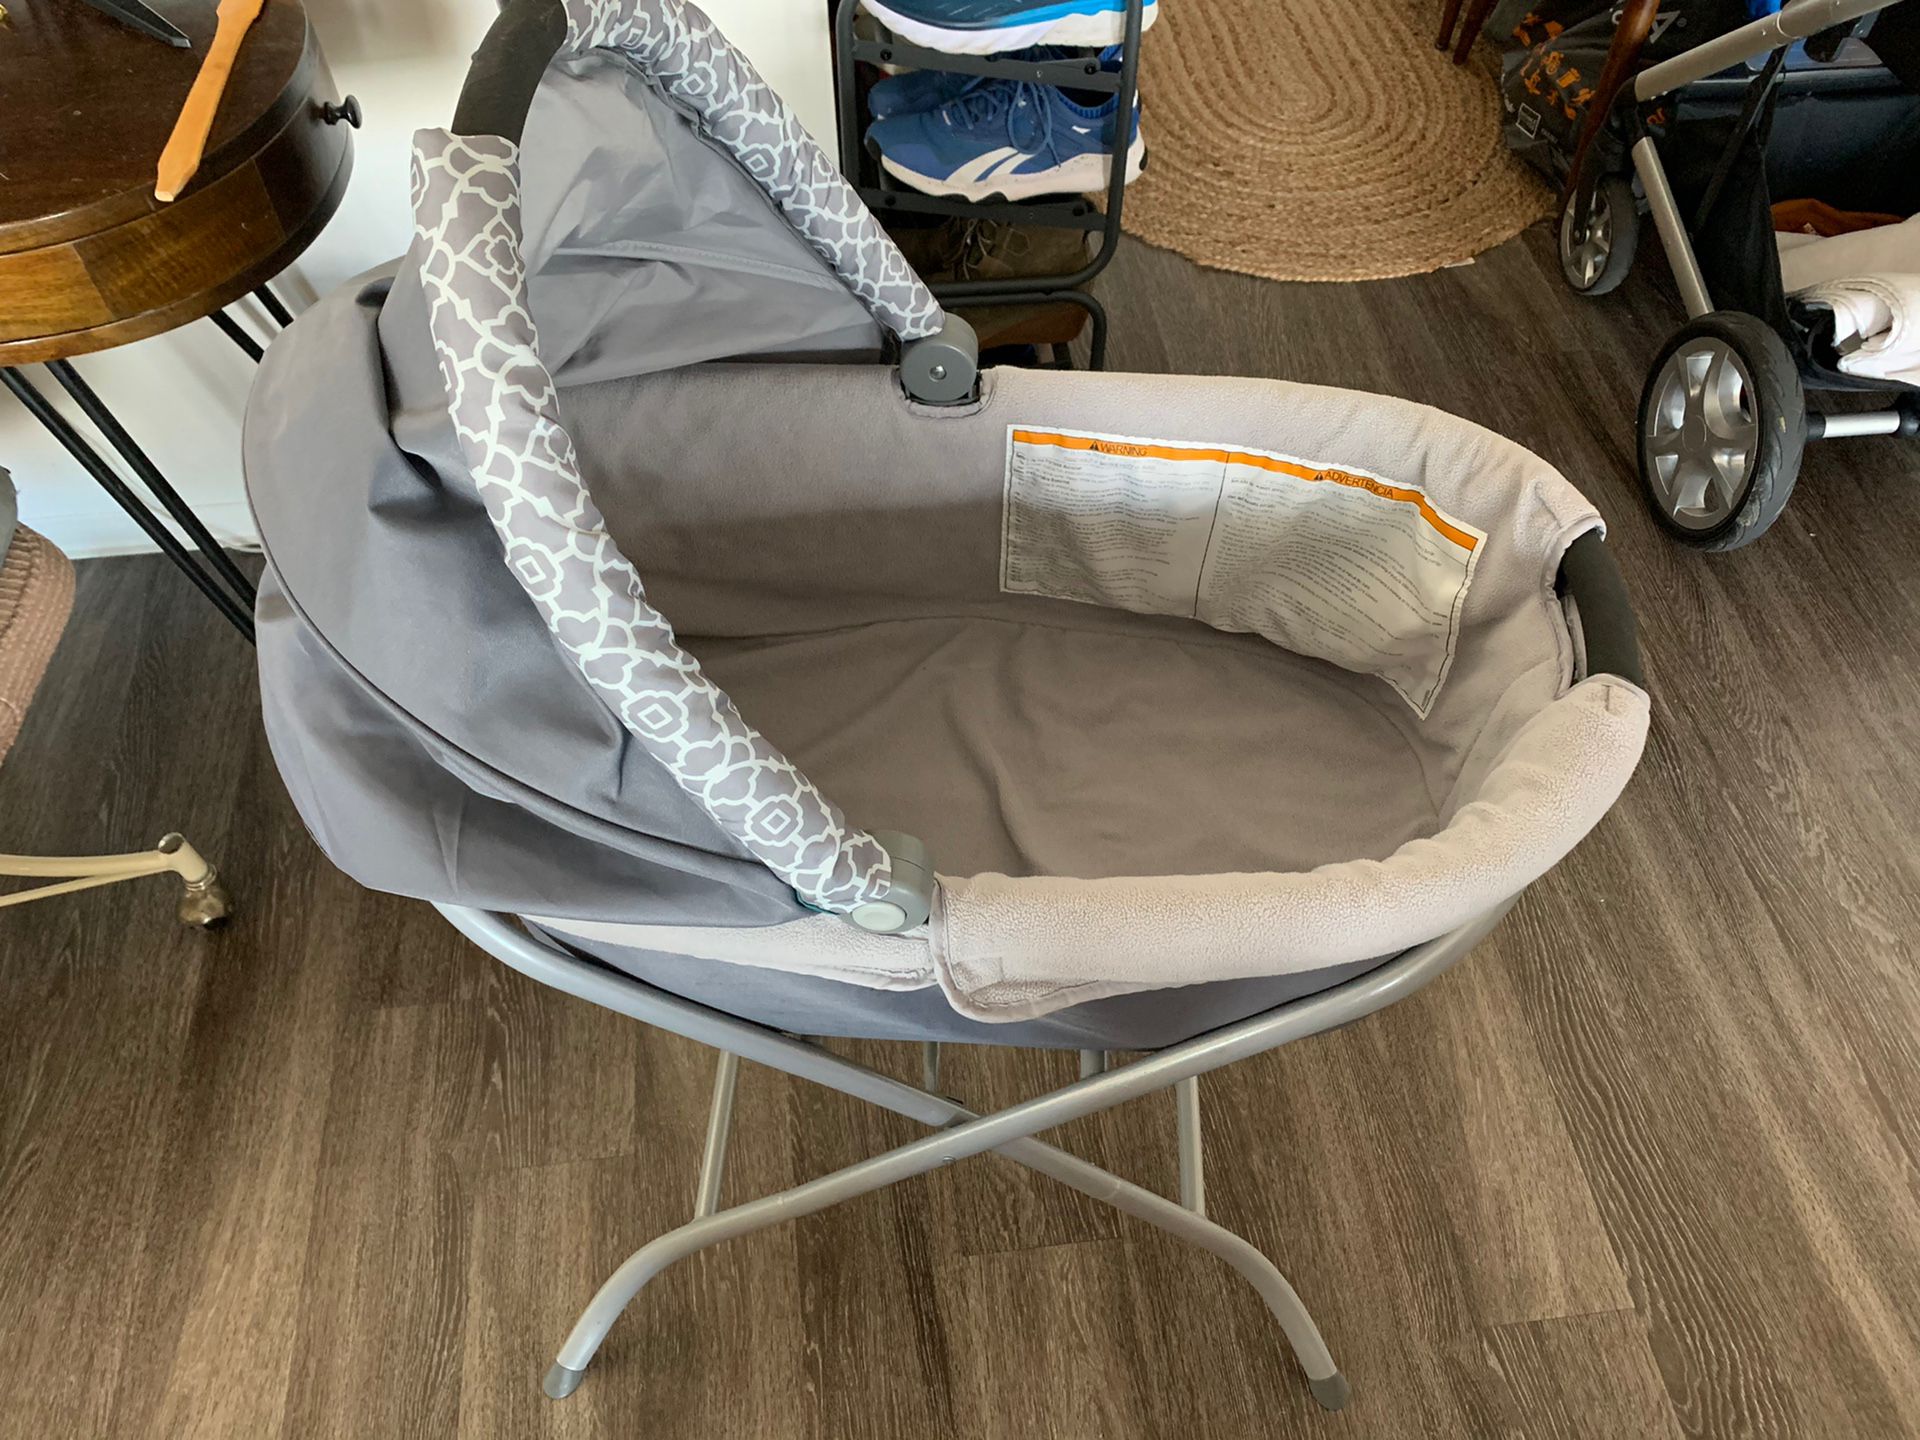 FREE - Great Condition Portable Bassinet